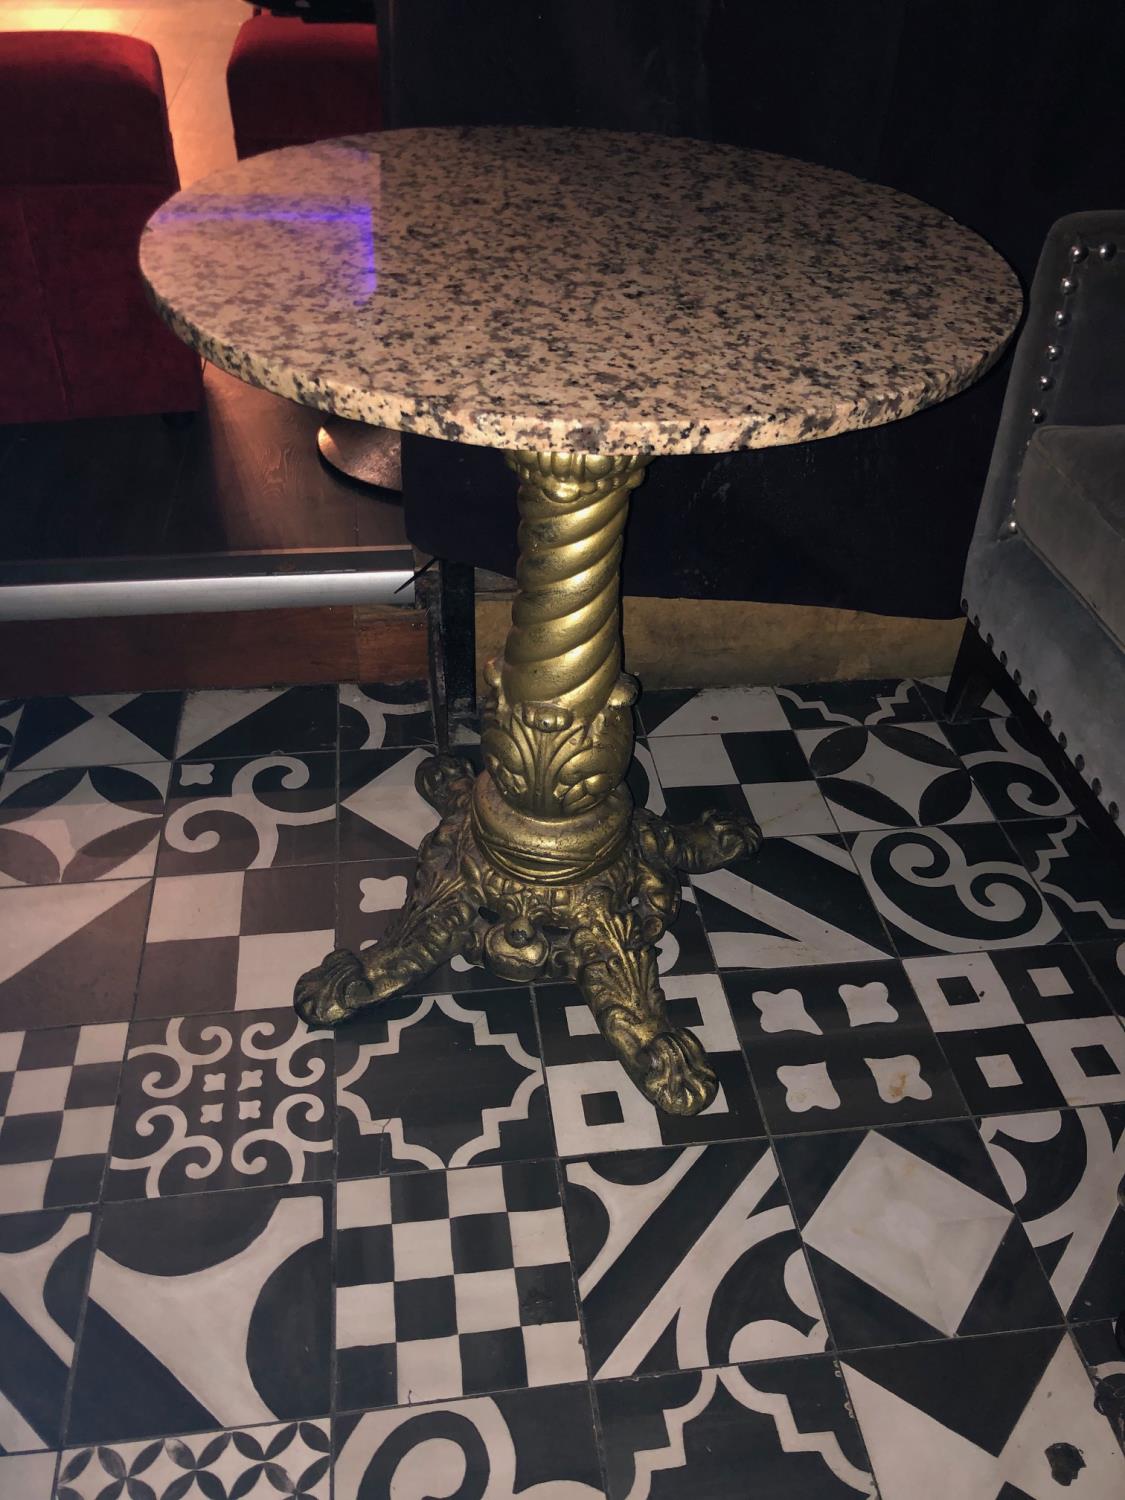 Circular restaurant table with decorative cast iron base gold W 63cm H 73cm - Image 2 of 2